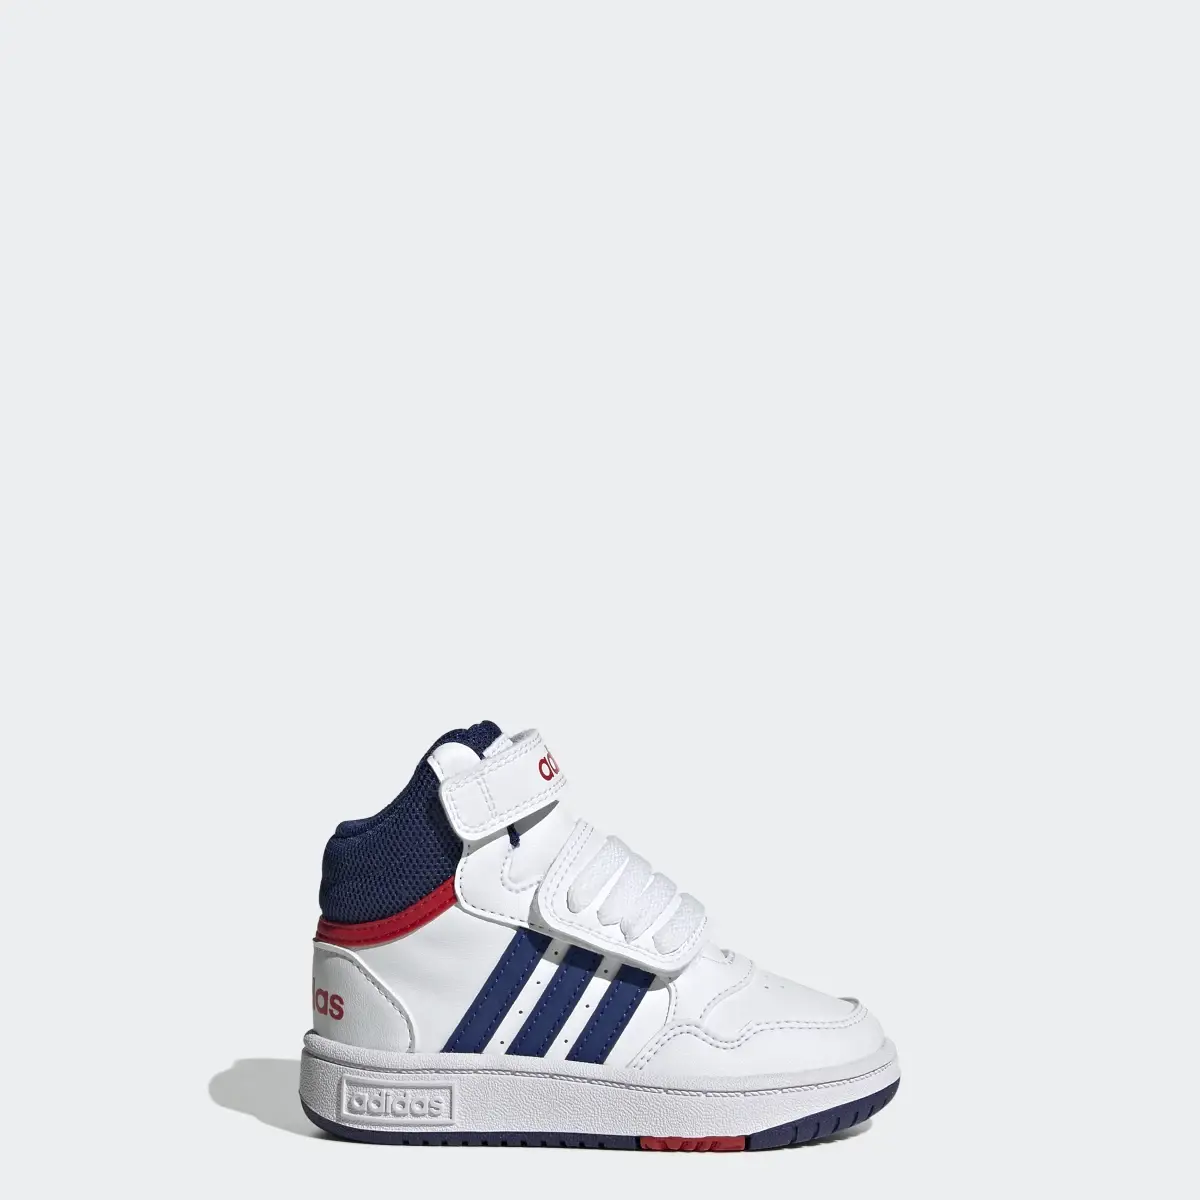 Adidas Hoops Mid Shoes. 1